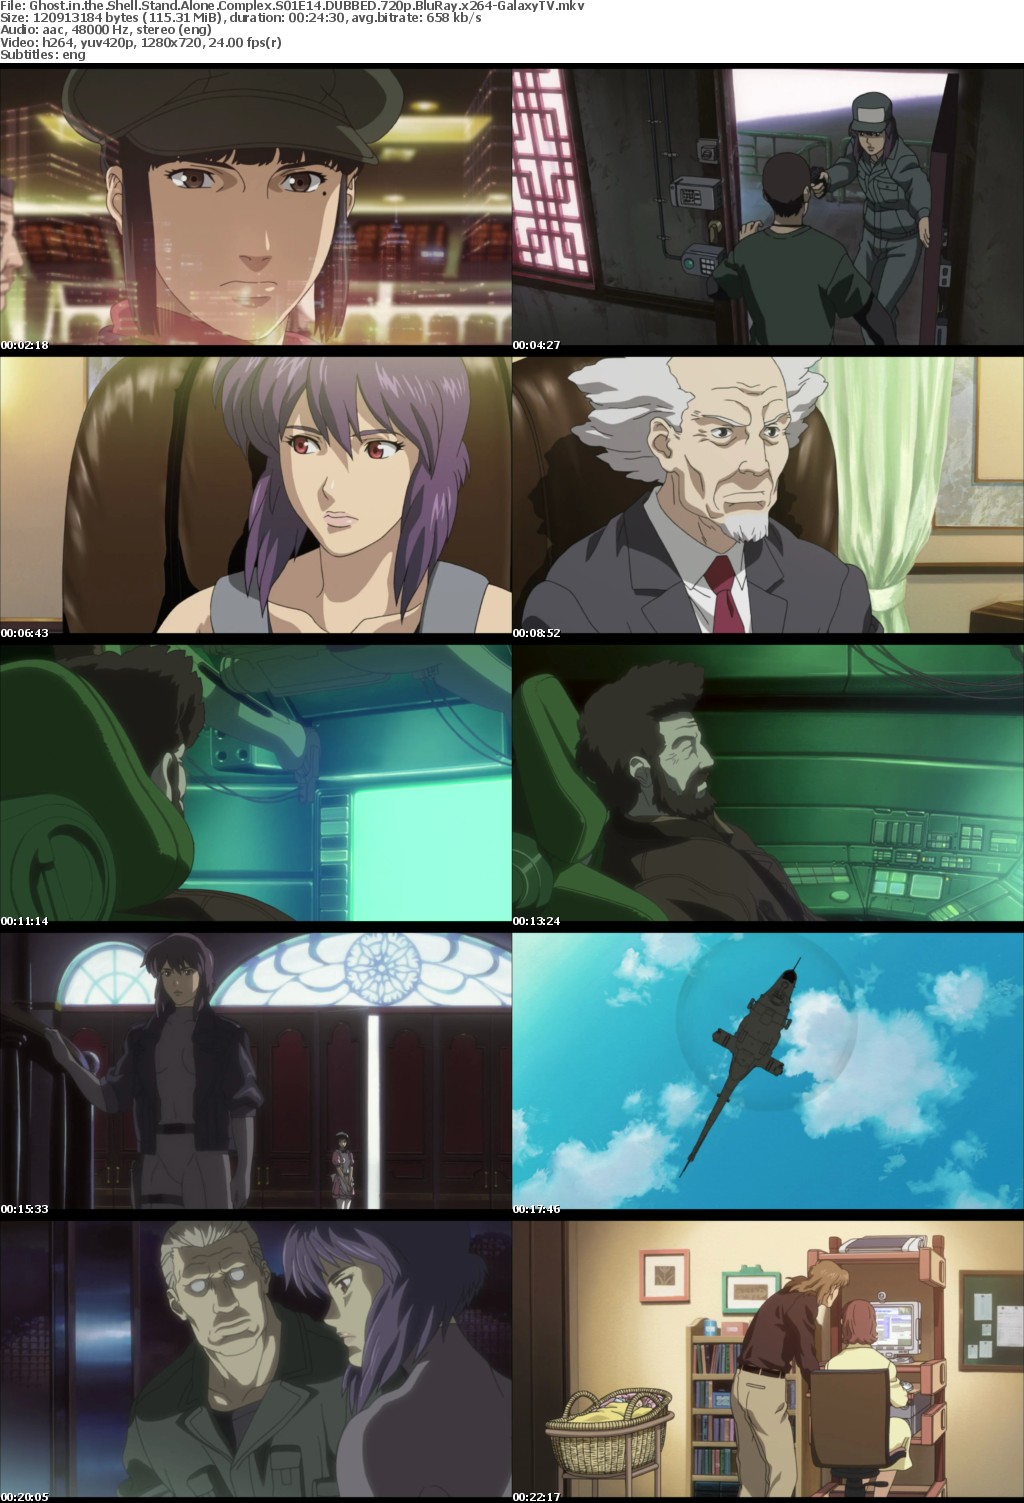 Ghost in the Shell Stand Alone Complex S01 COMPLETE DUBBED 720p BluRay x264-GalaxyTV